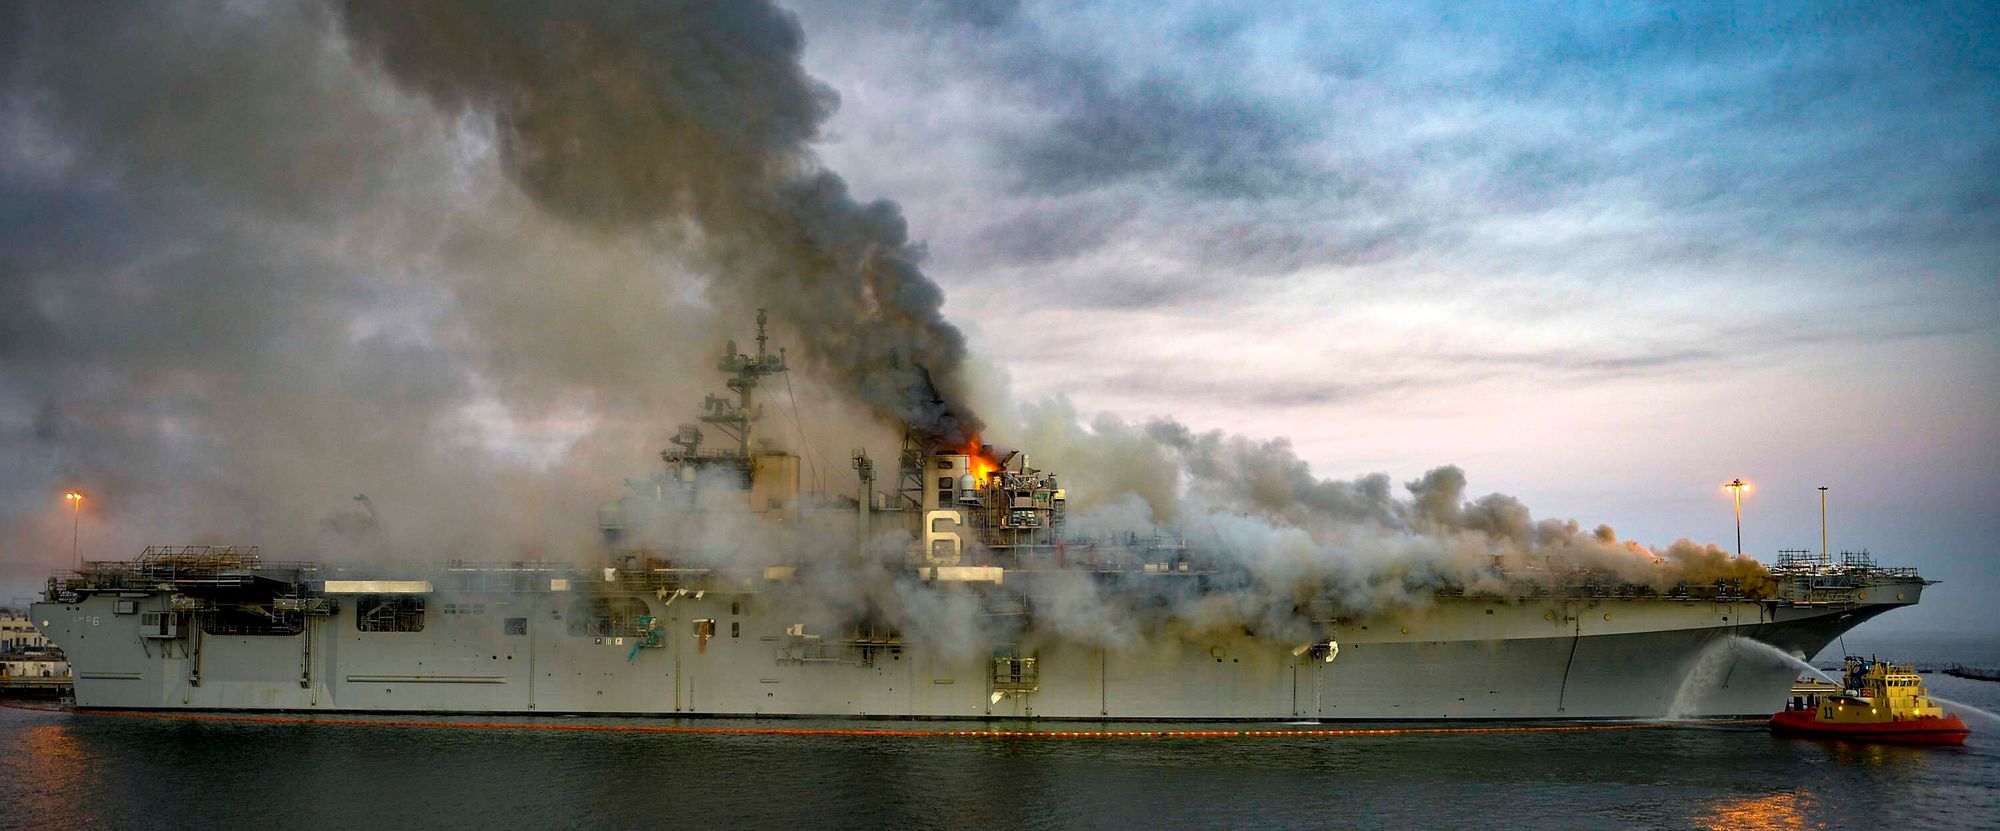 USS Bonhomme Richard Fire – Was it Arson Or Widespread Safety Failures?